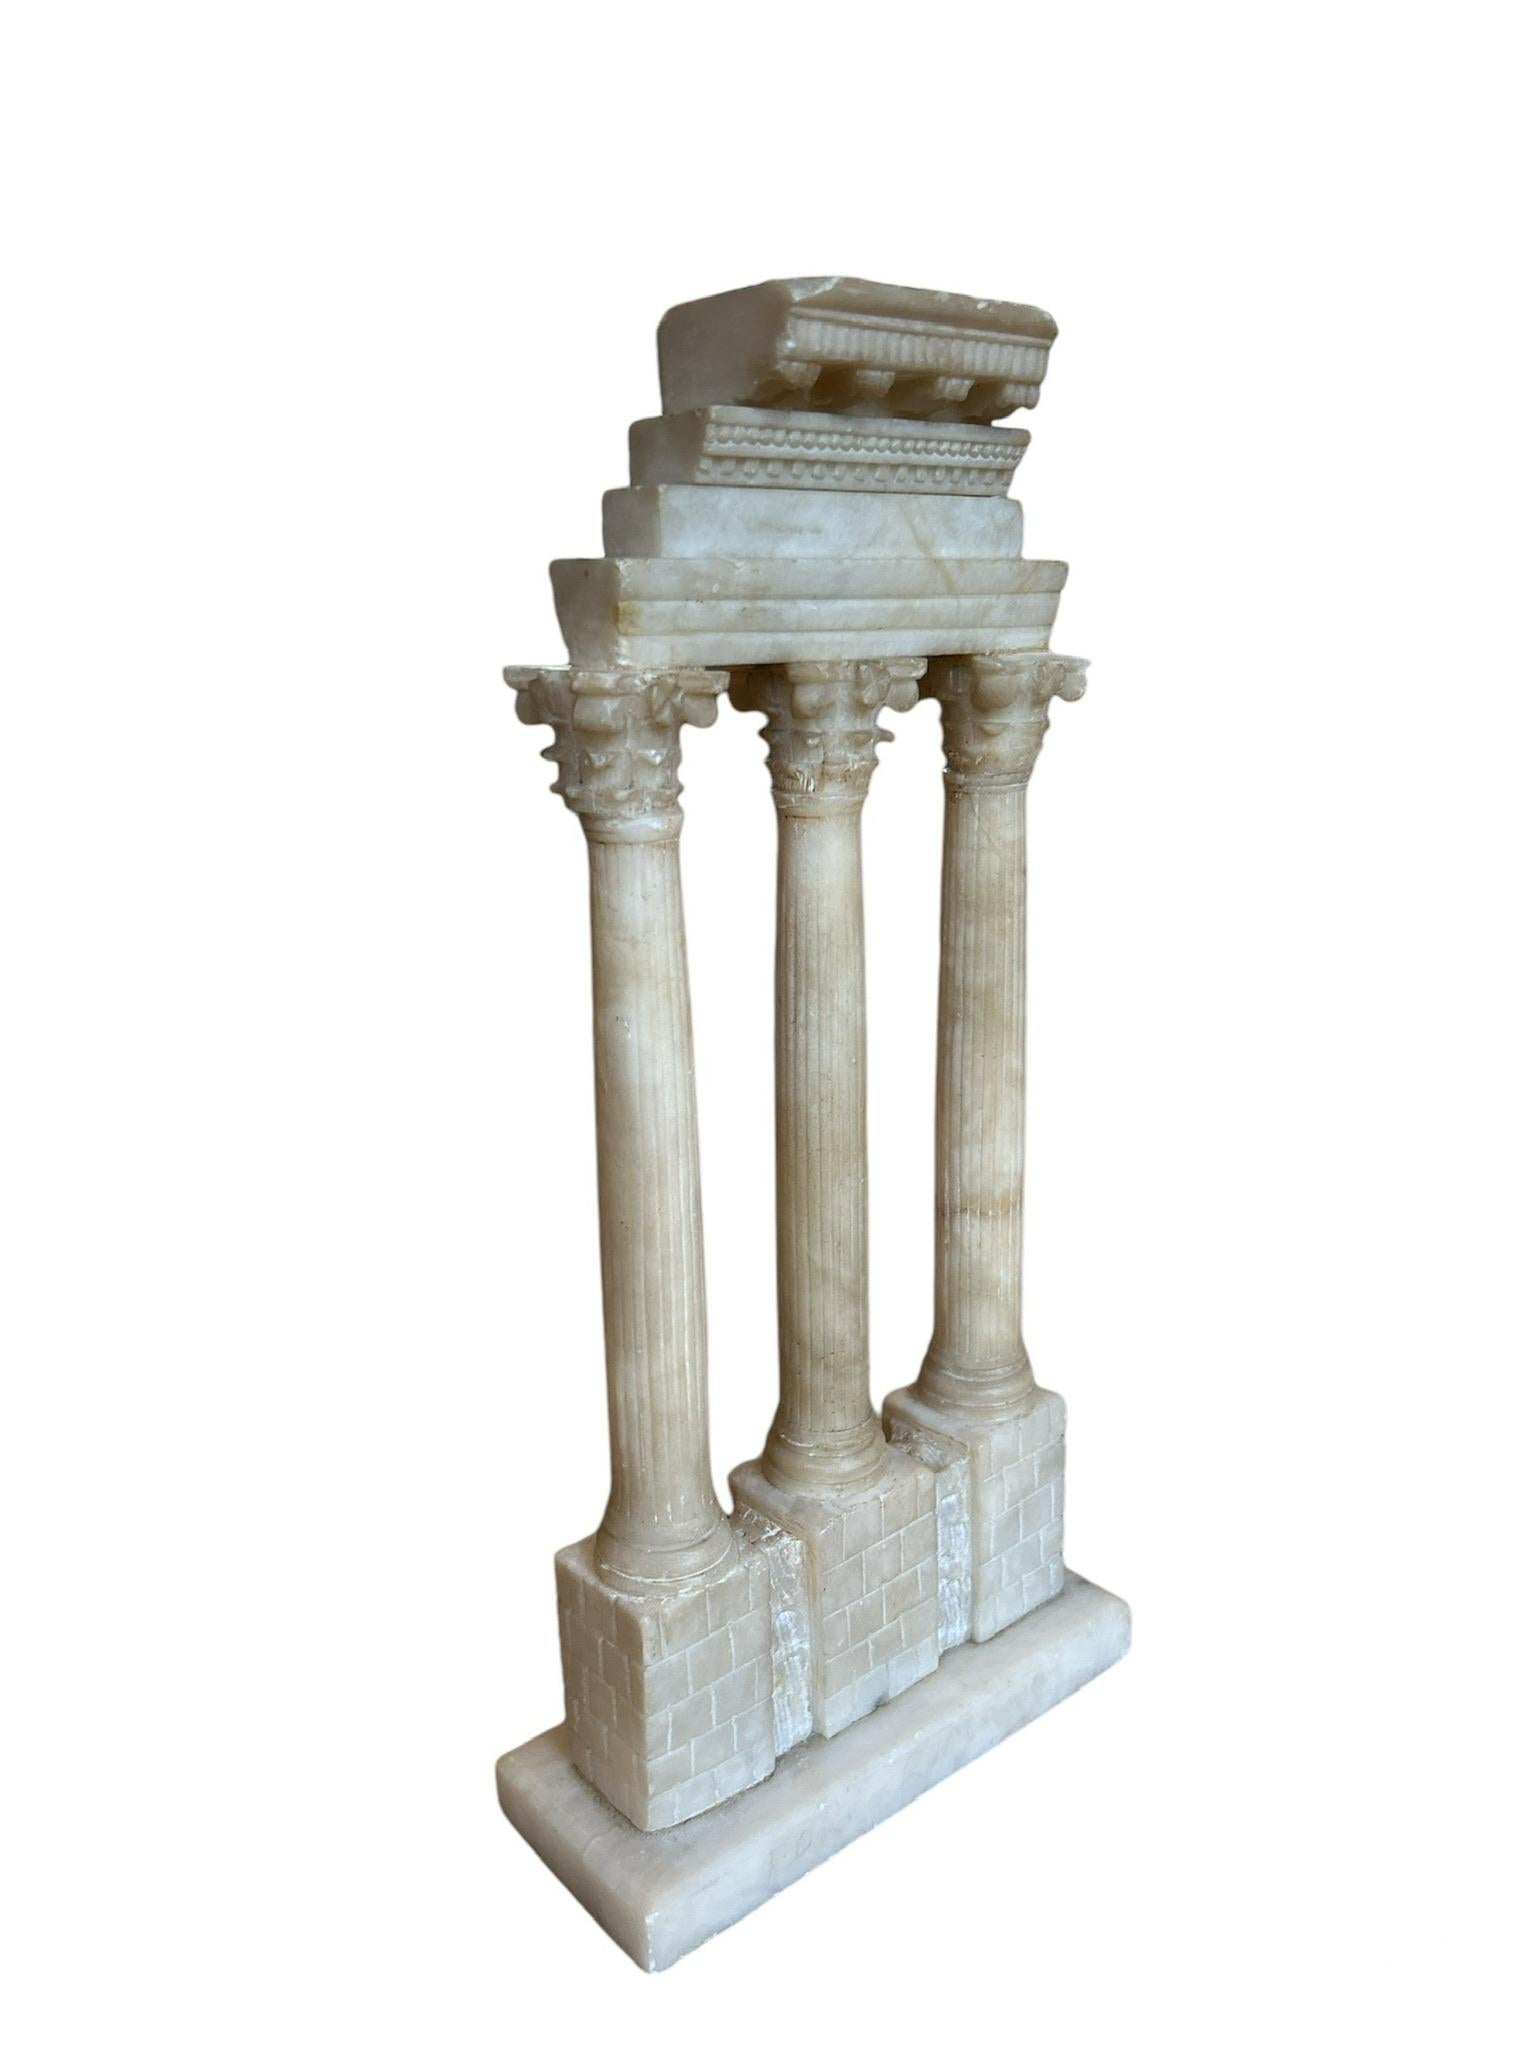 Temple of Castor & Pollux in alabaster. Grand Tour souvenir.
(Later) inscription on the base: Forum Romano.
We also have this object in bronze but slightly smaller.